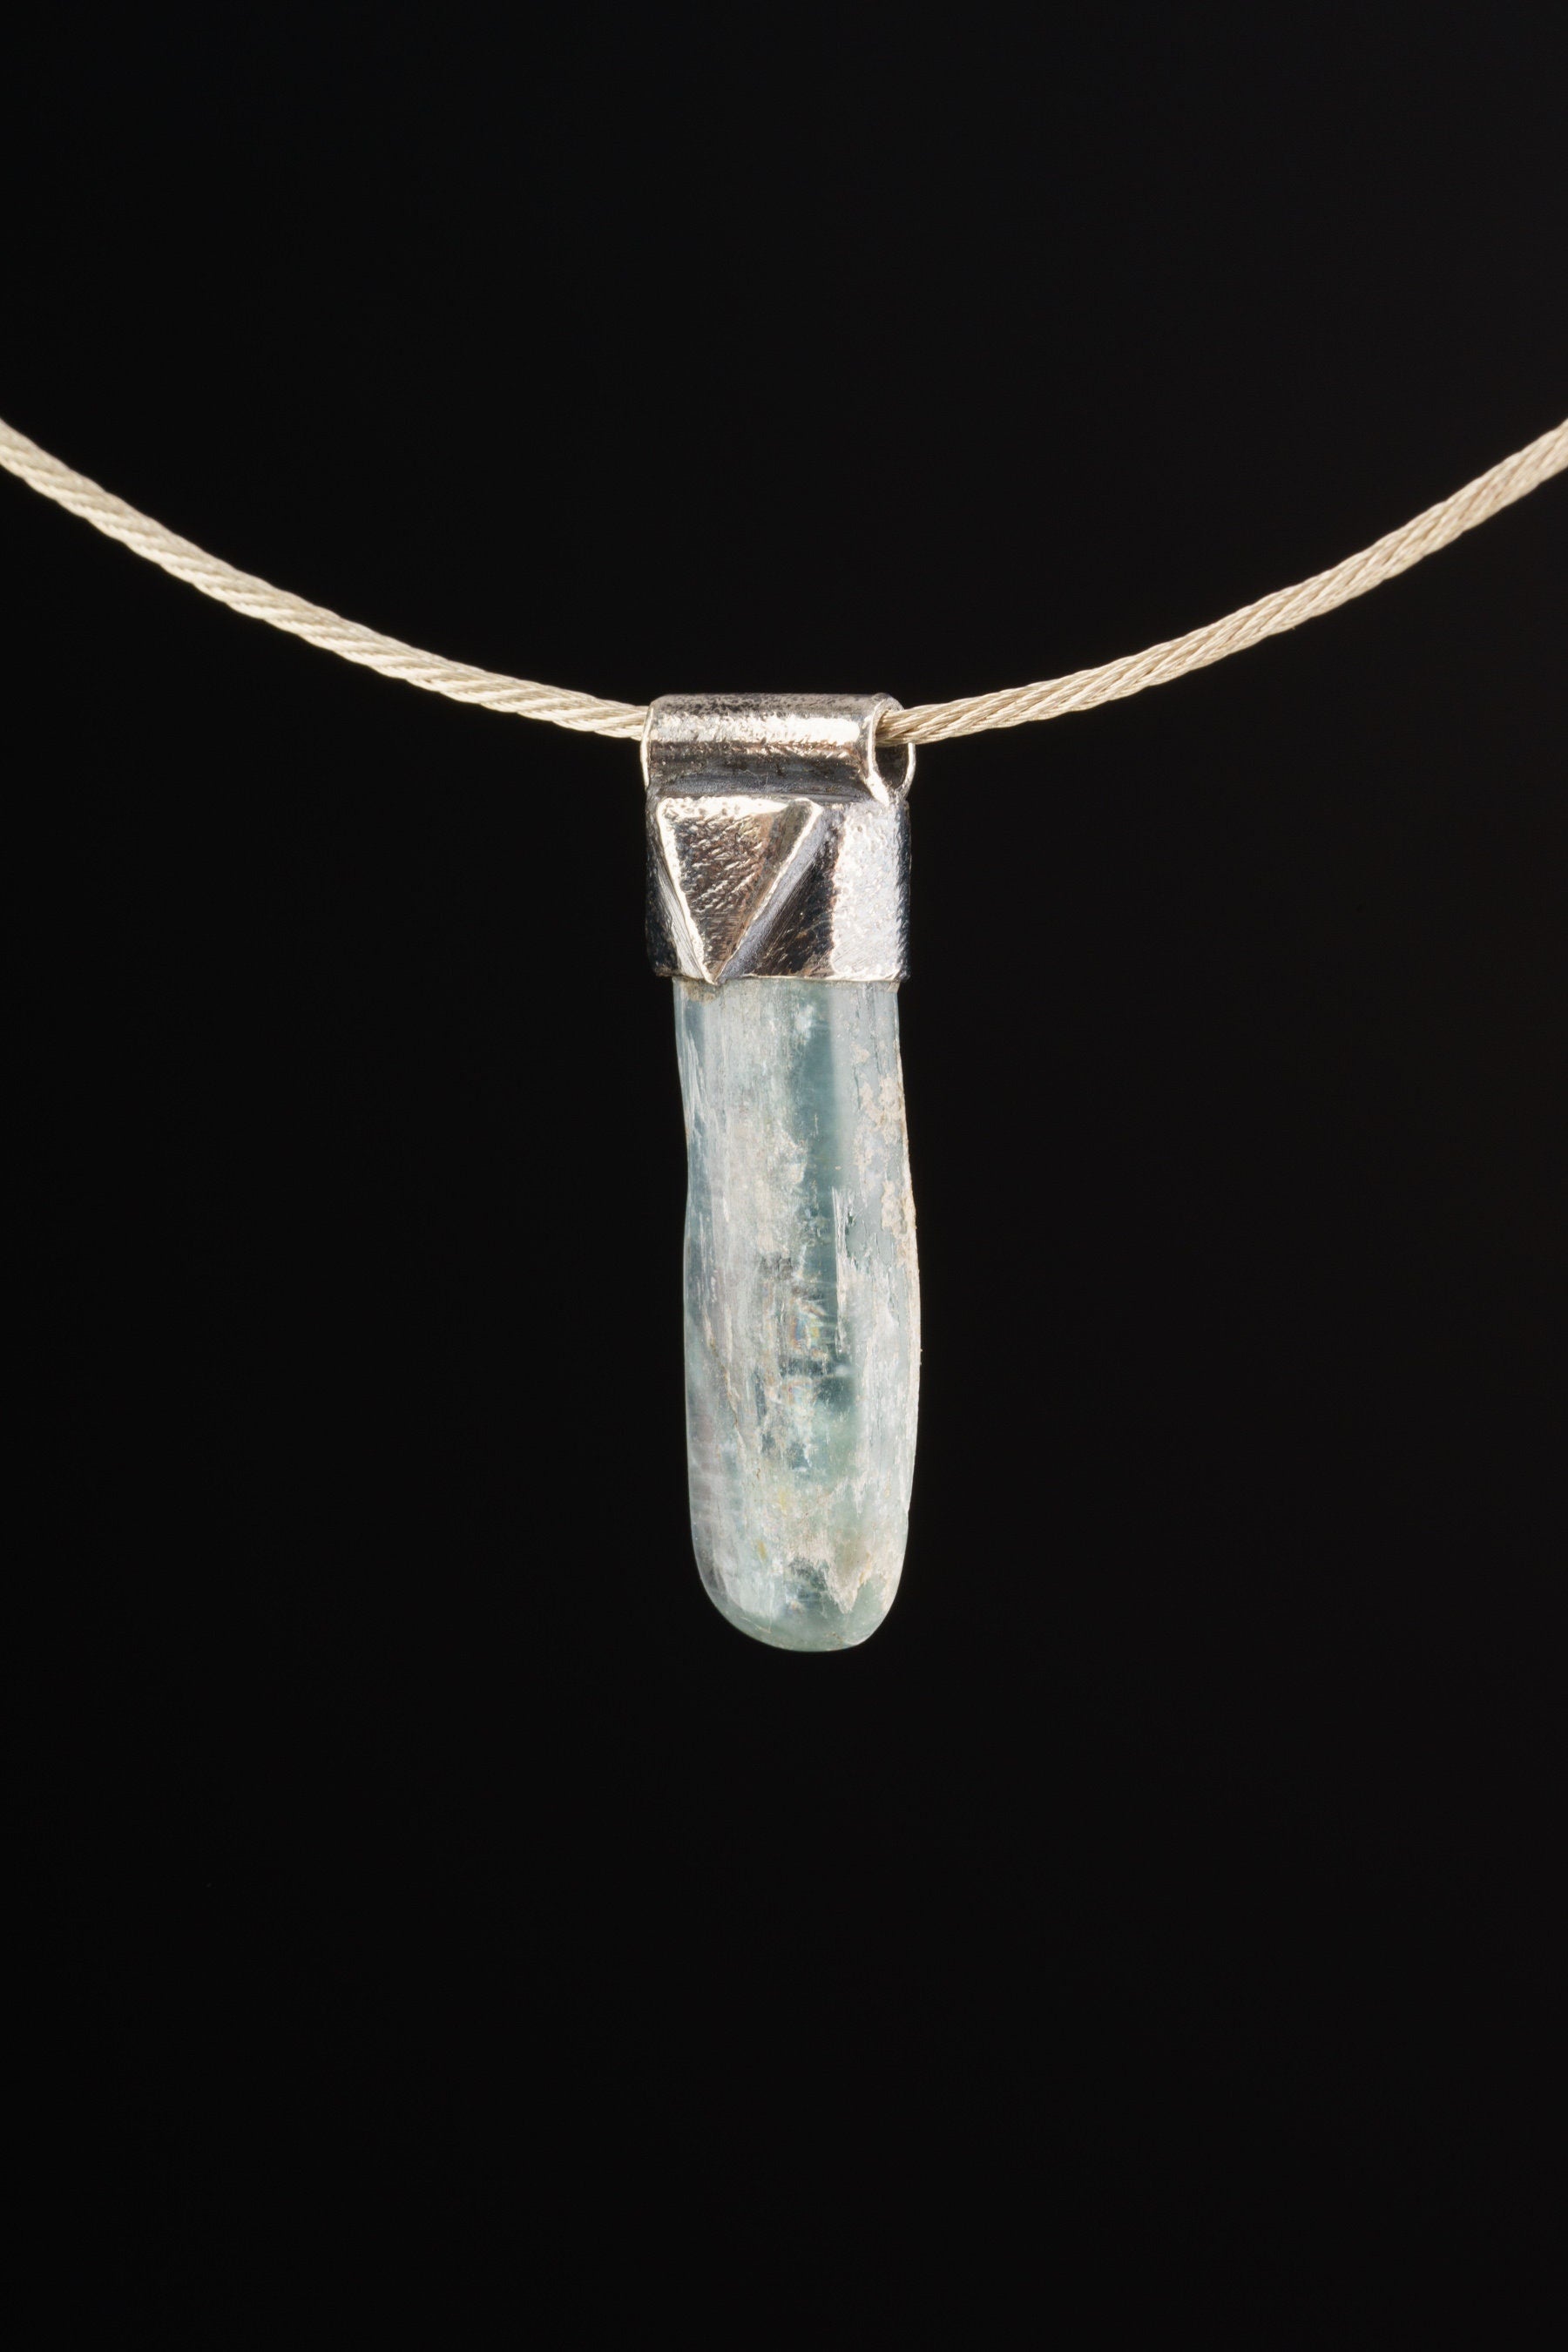 Tumbled Kyanite - Stack Pendant textured & oxidised - 925 sterling silver - Crystal Necklace